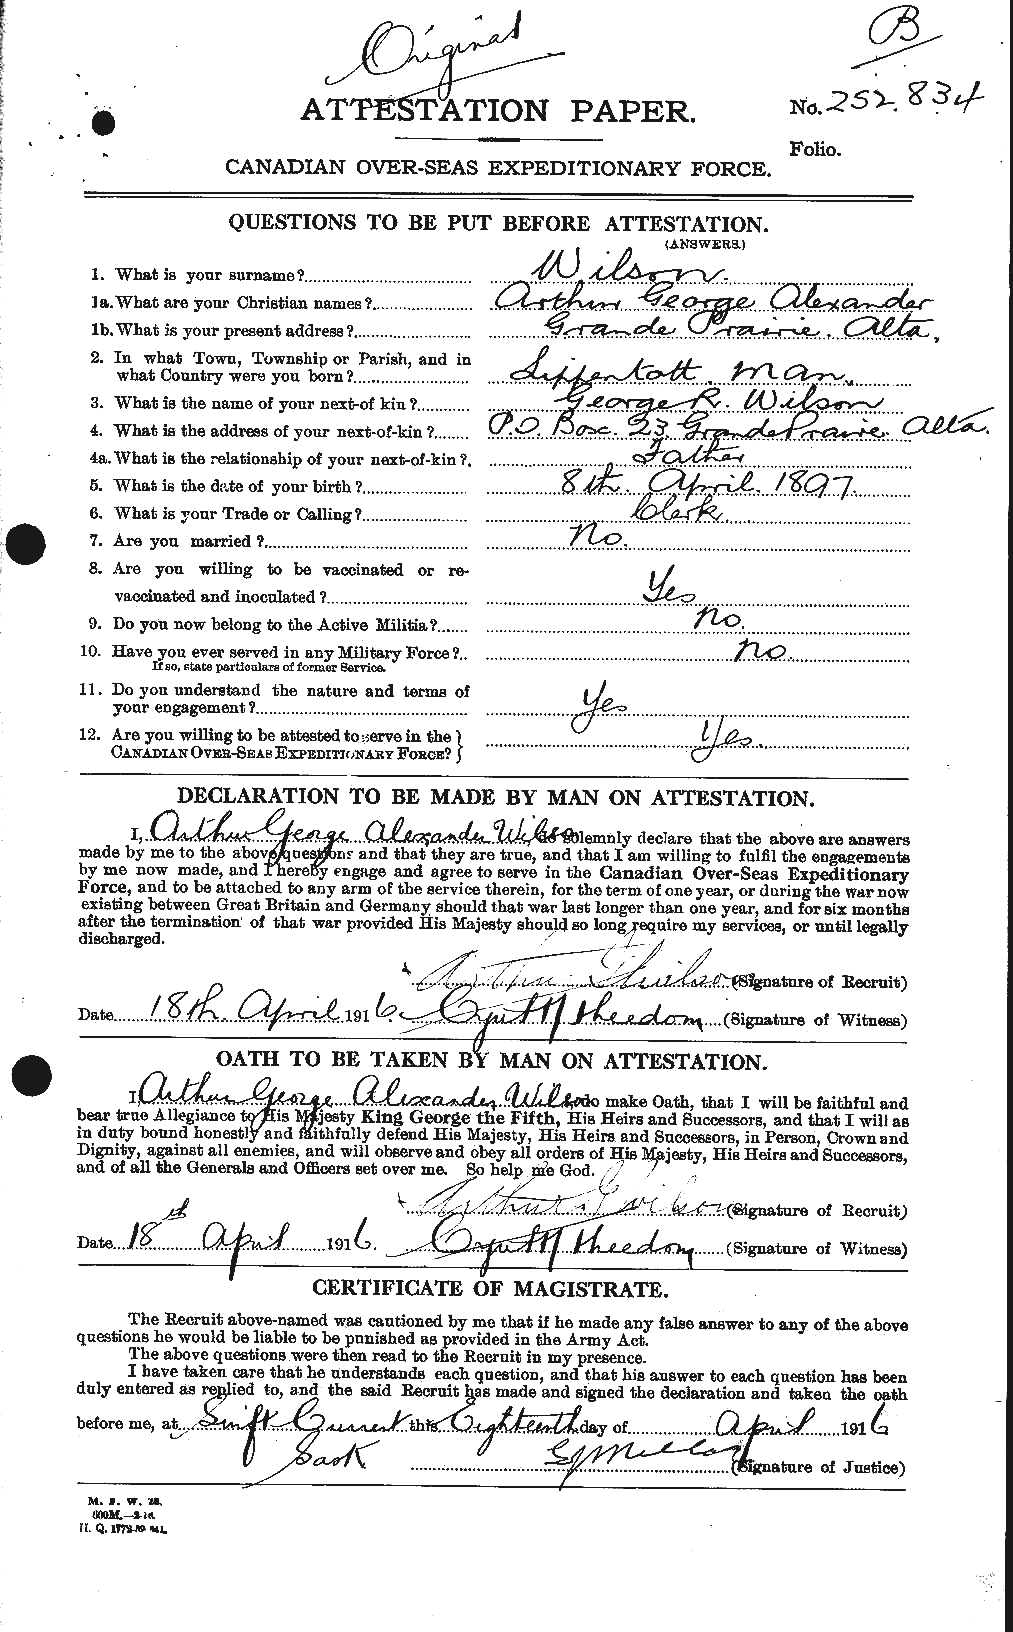 Personnel Records of the First World War - CEF 677763a